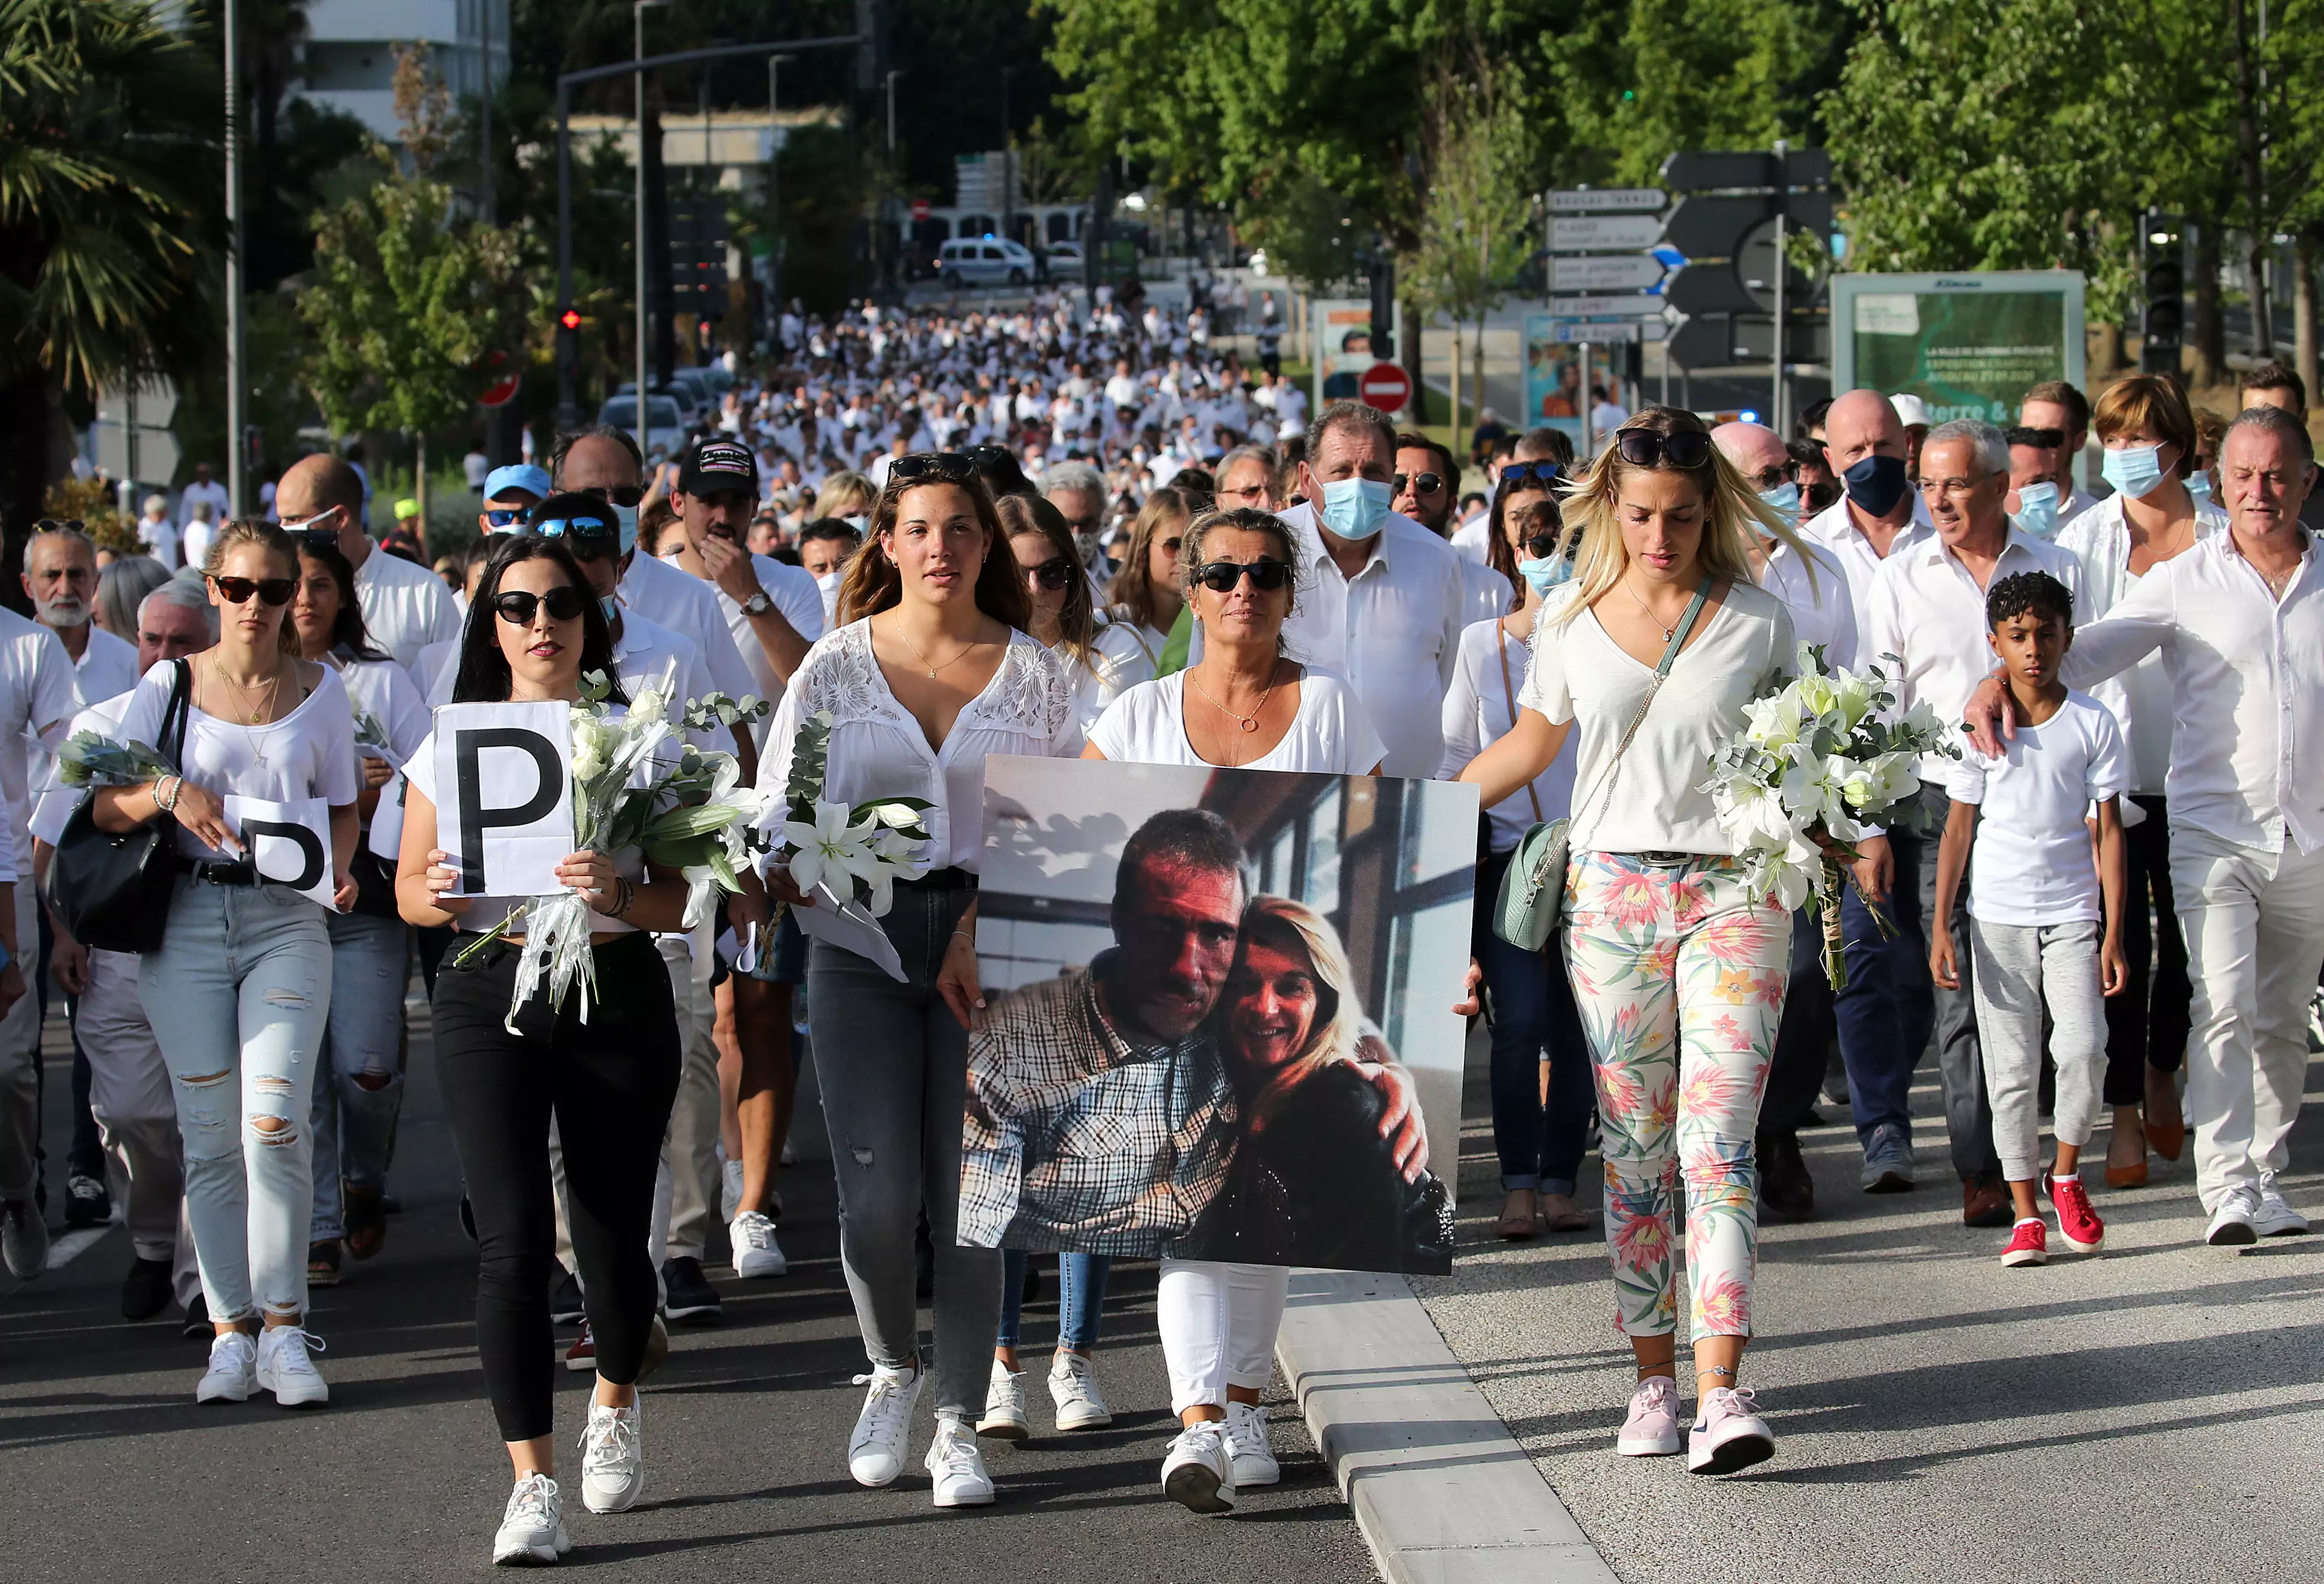 Thousands marched in Mr Monguillot's memory.